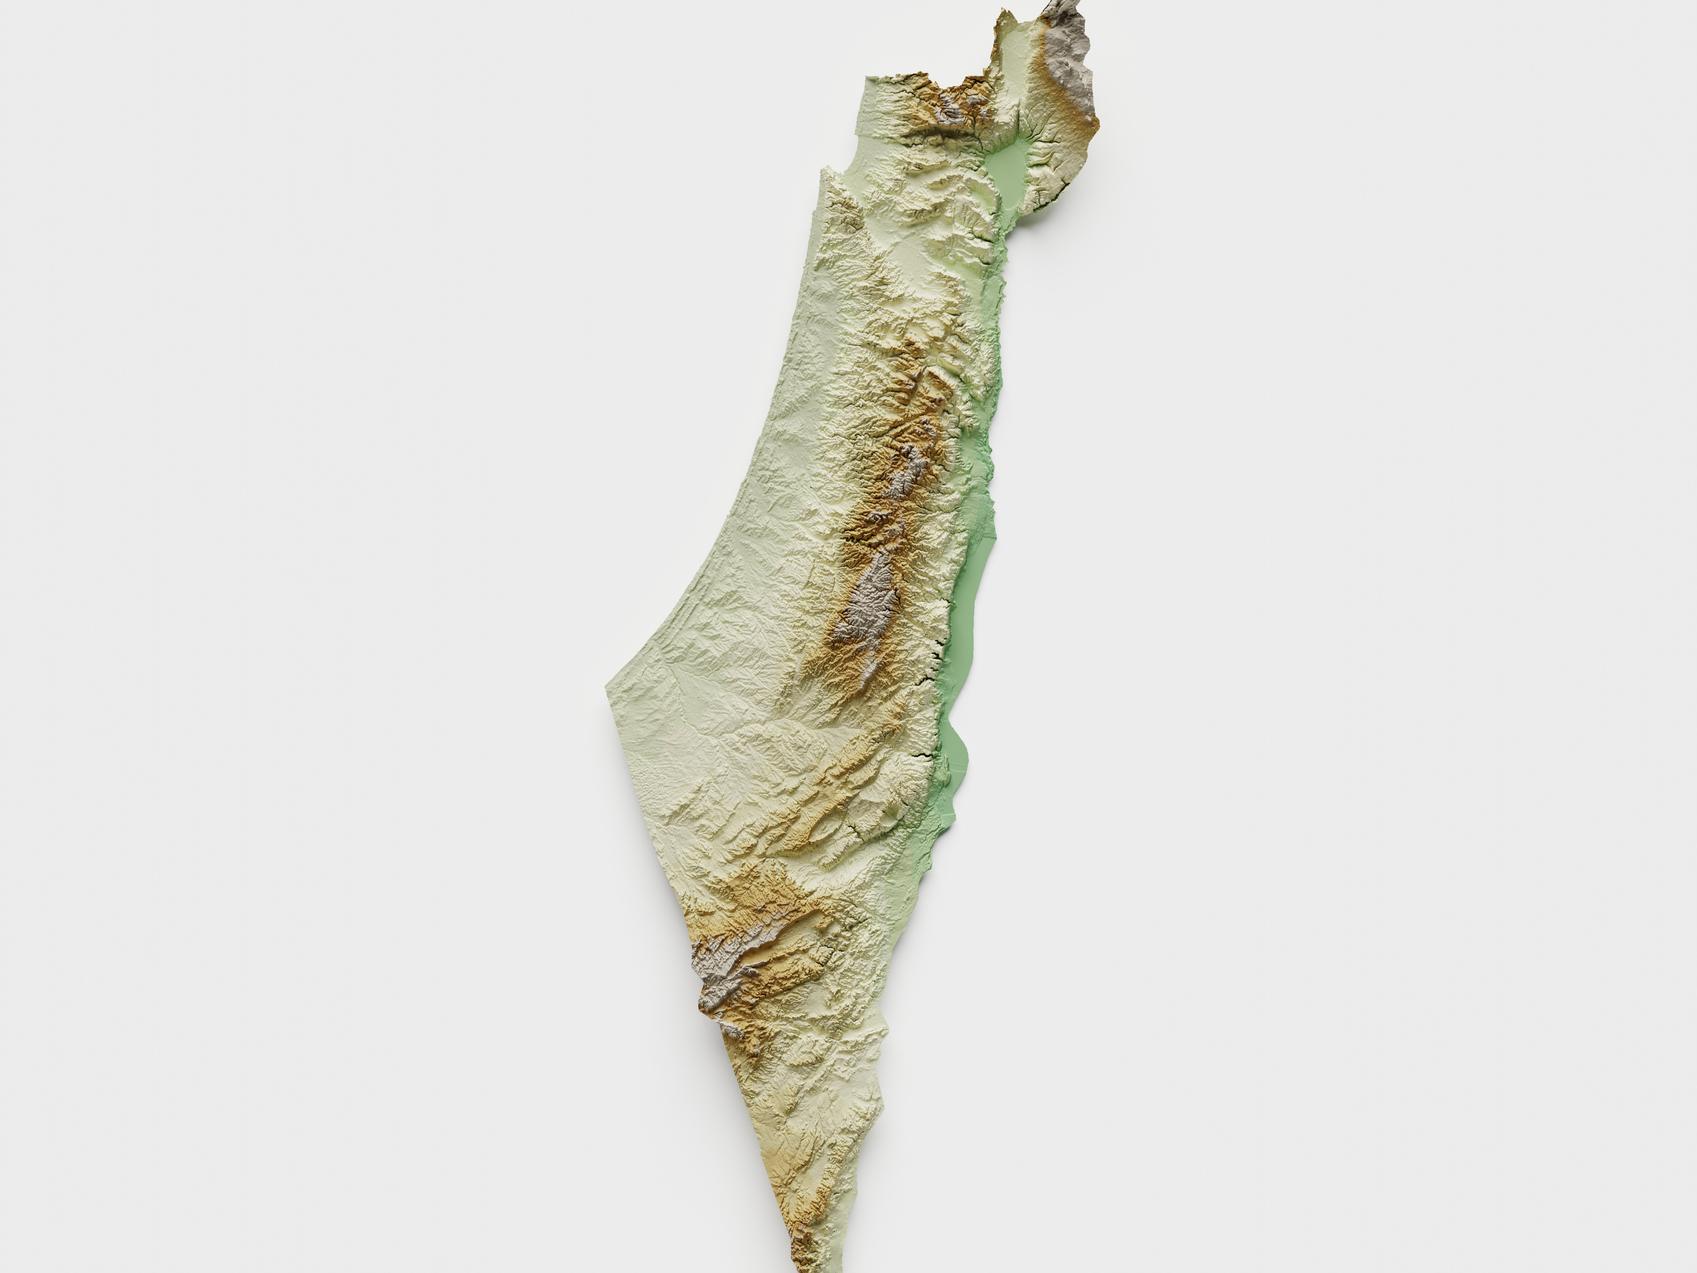 A topographical map of the area encompassing Israel and Palestine.